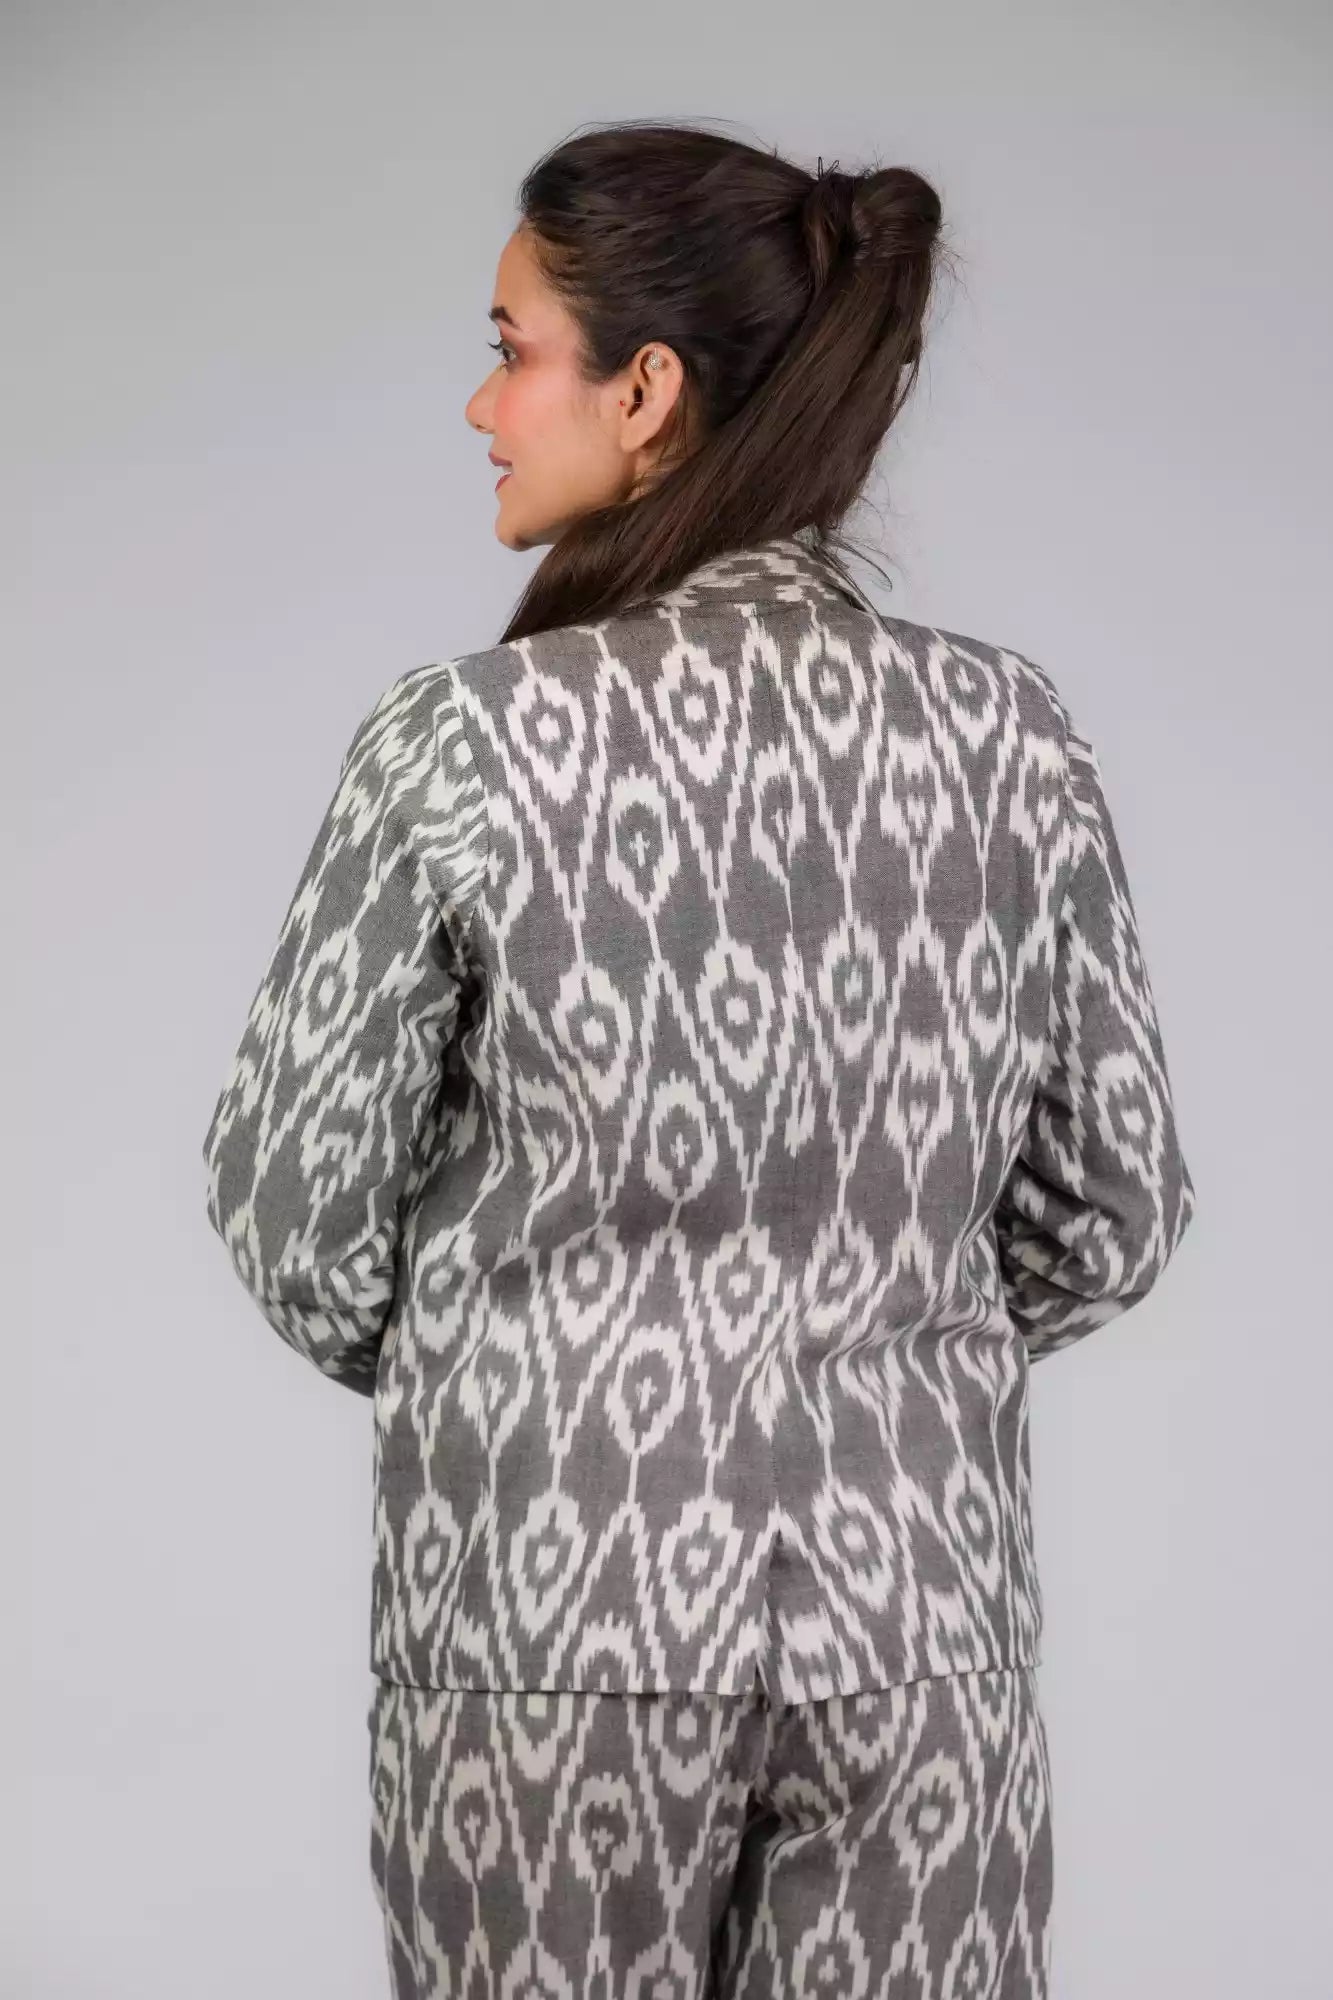 The view from back of Grey Woven Ikkat bottom In Pure Cotton, formal office wear for women